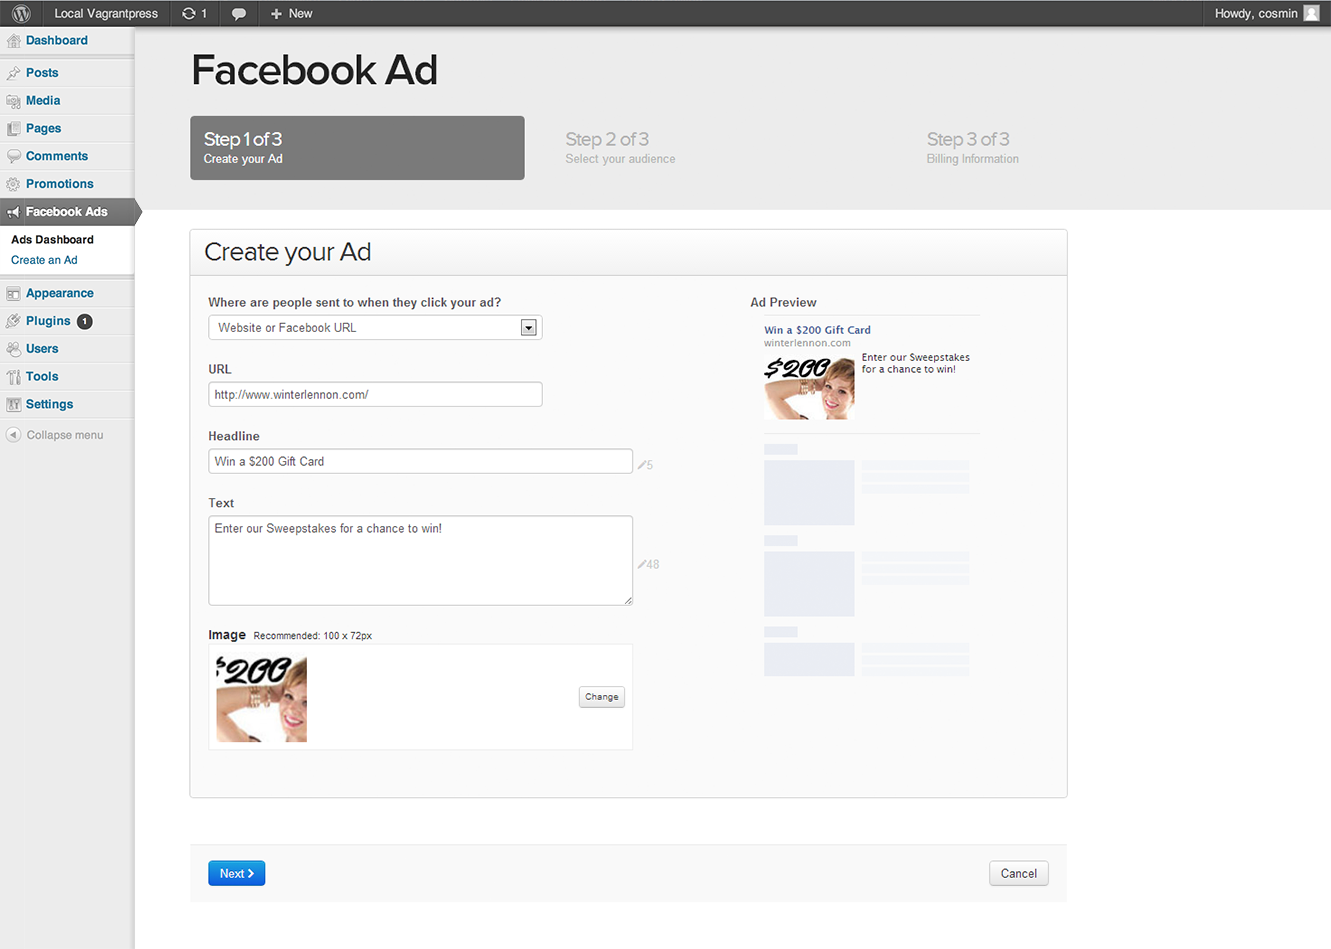 Create a Facebook Ad in your Wordpress Admin (Part 1)